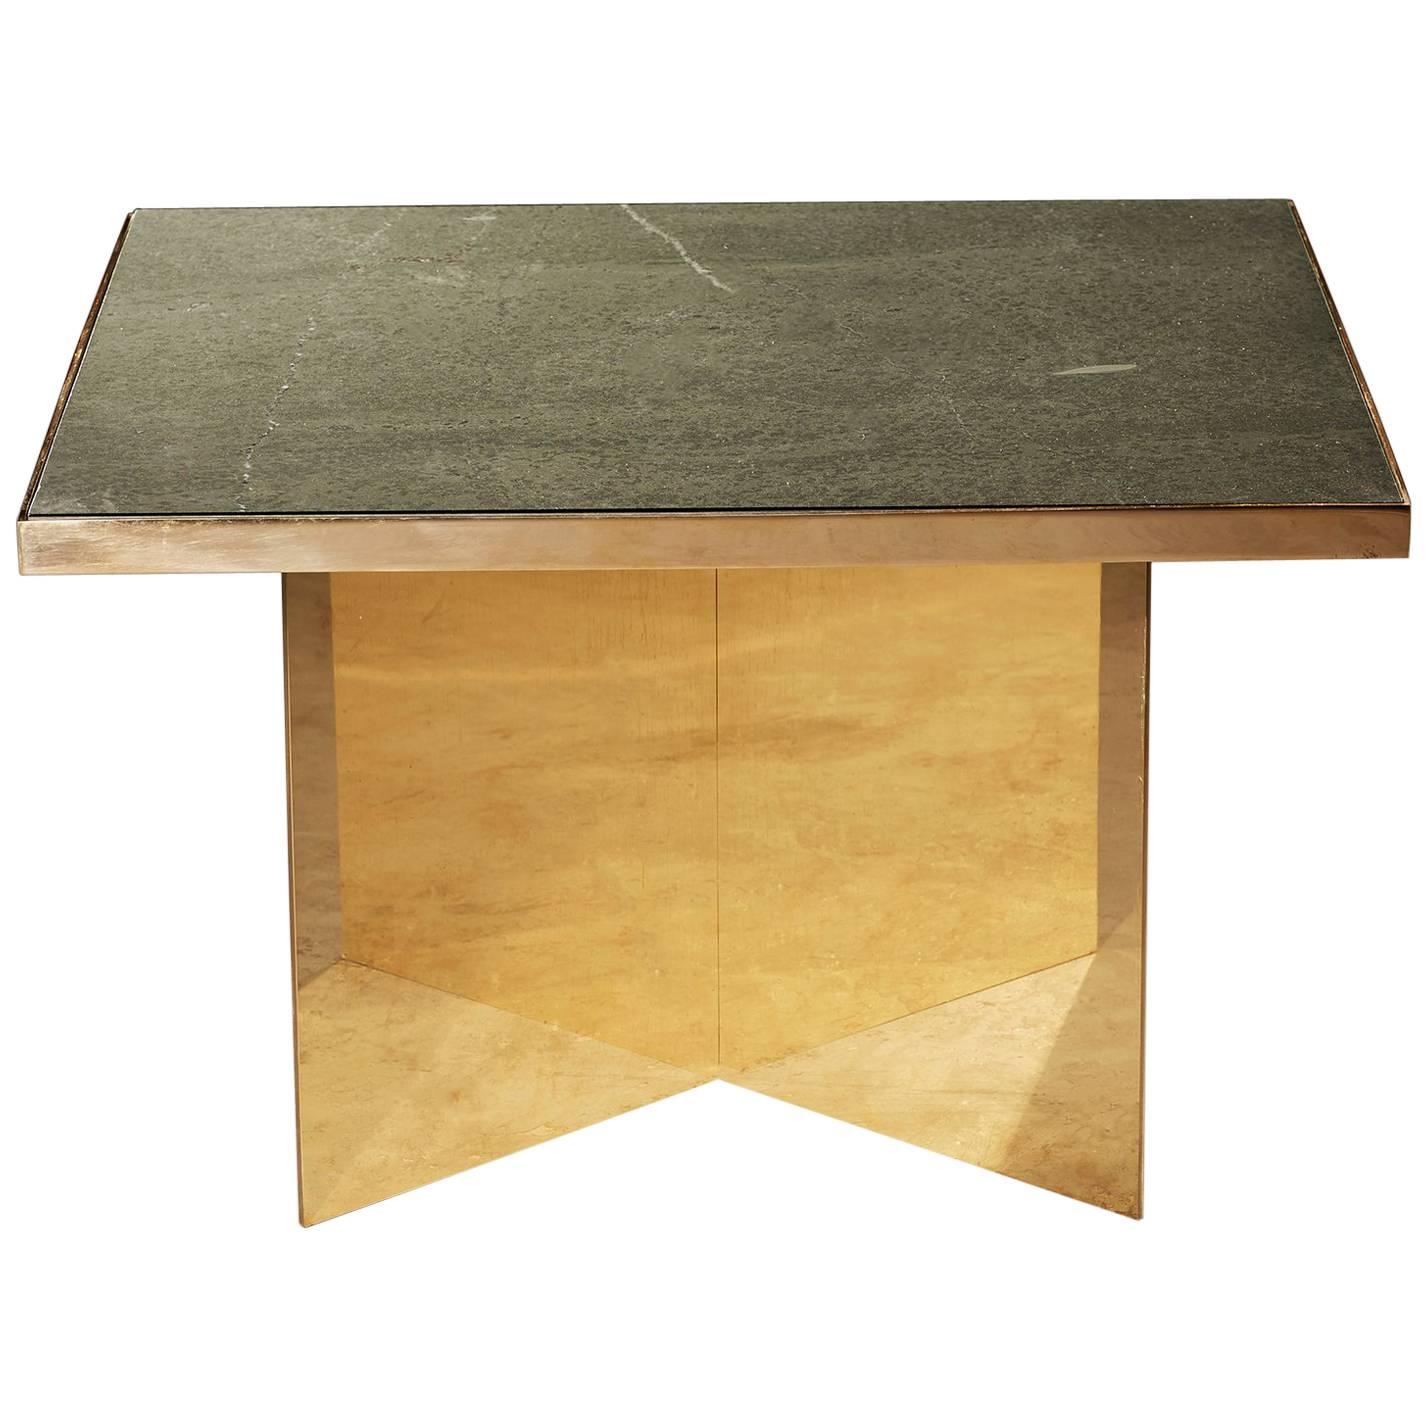 Verdi Coffee Table — Small — Solid Brass Plate Base — Honed Cumbrian Slate Top For Sale